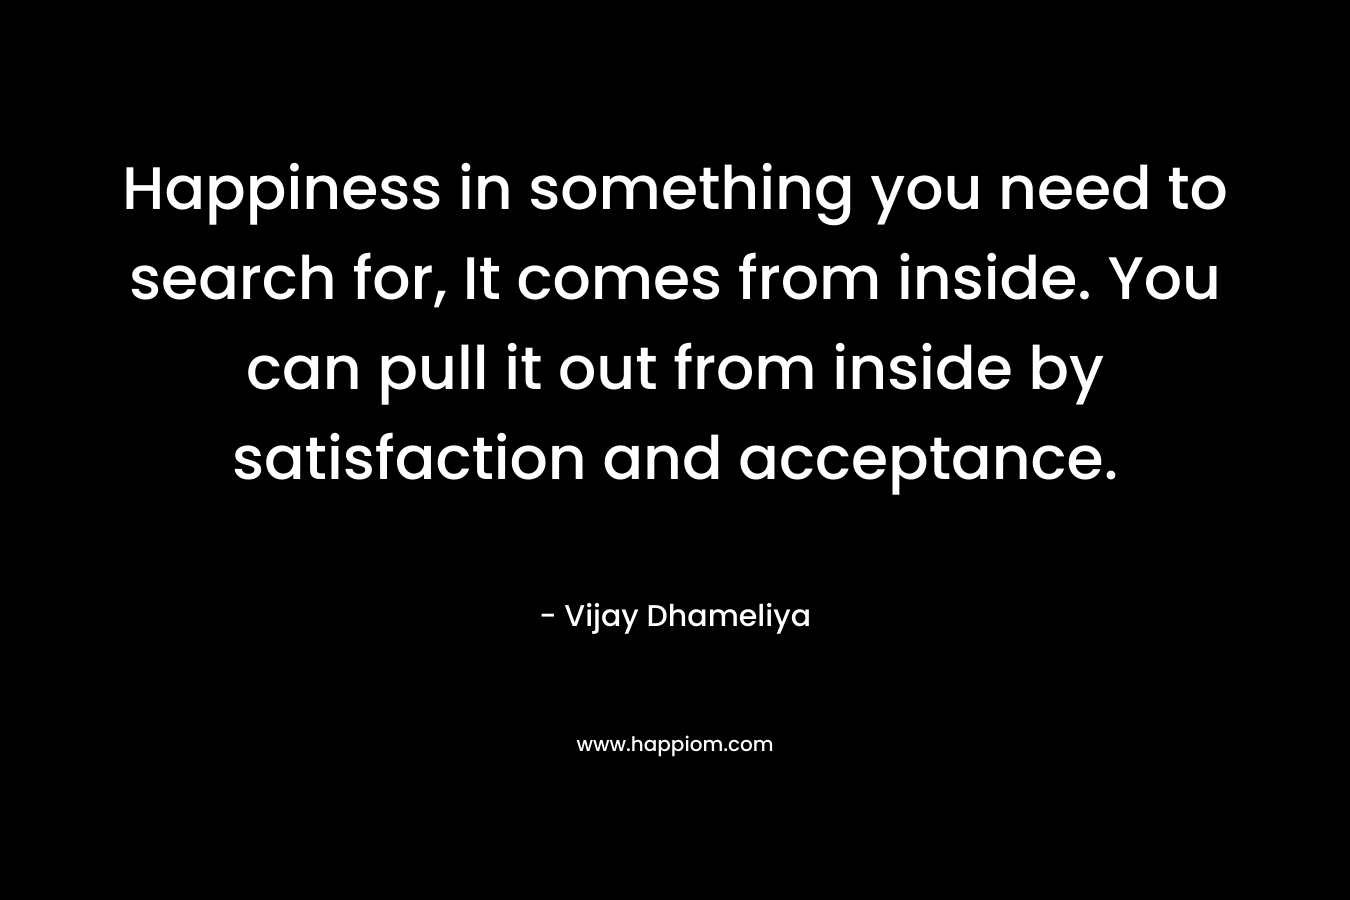 Happiness in something you need to search for, It comes from inside. You can pull it out from inside by satisfaction and acceptance.